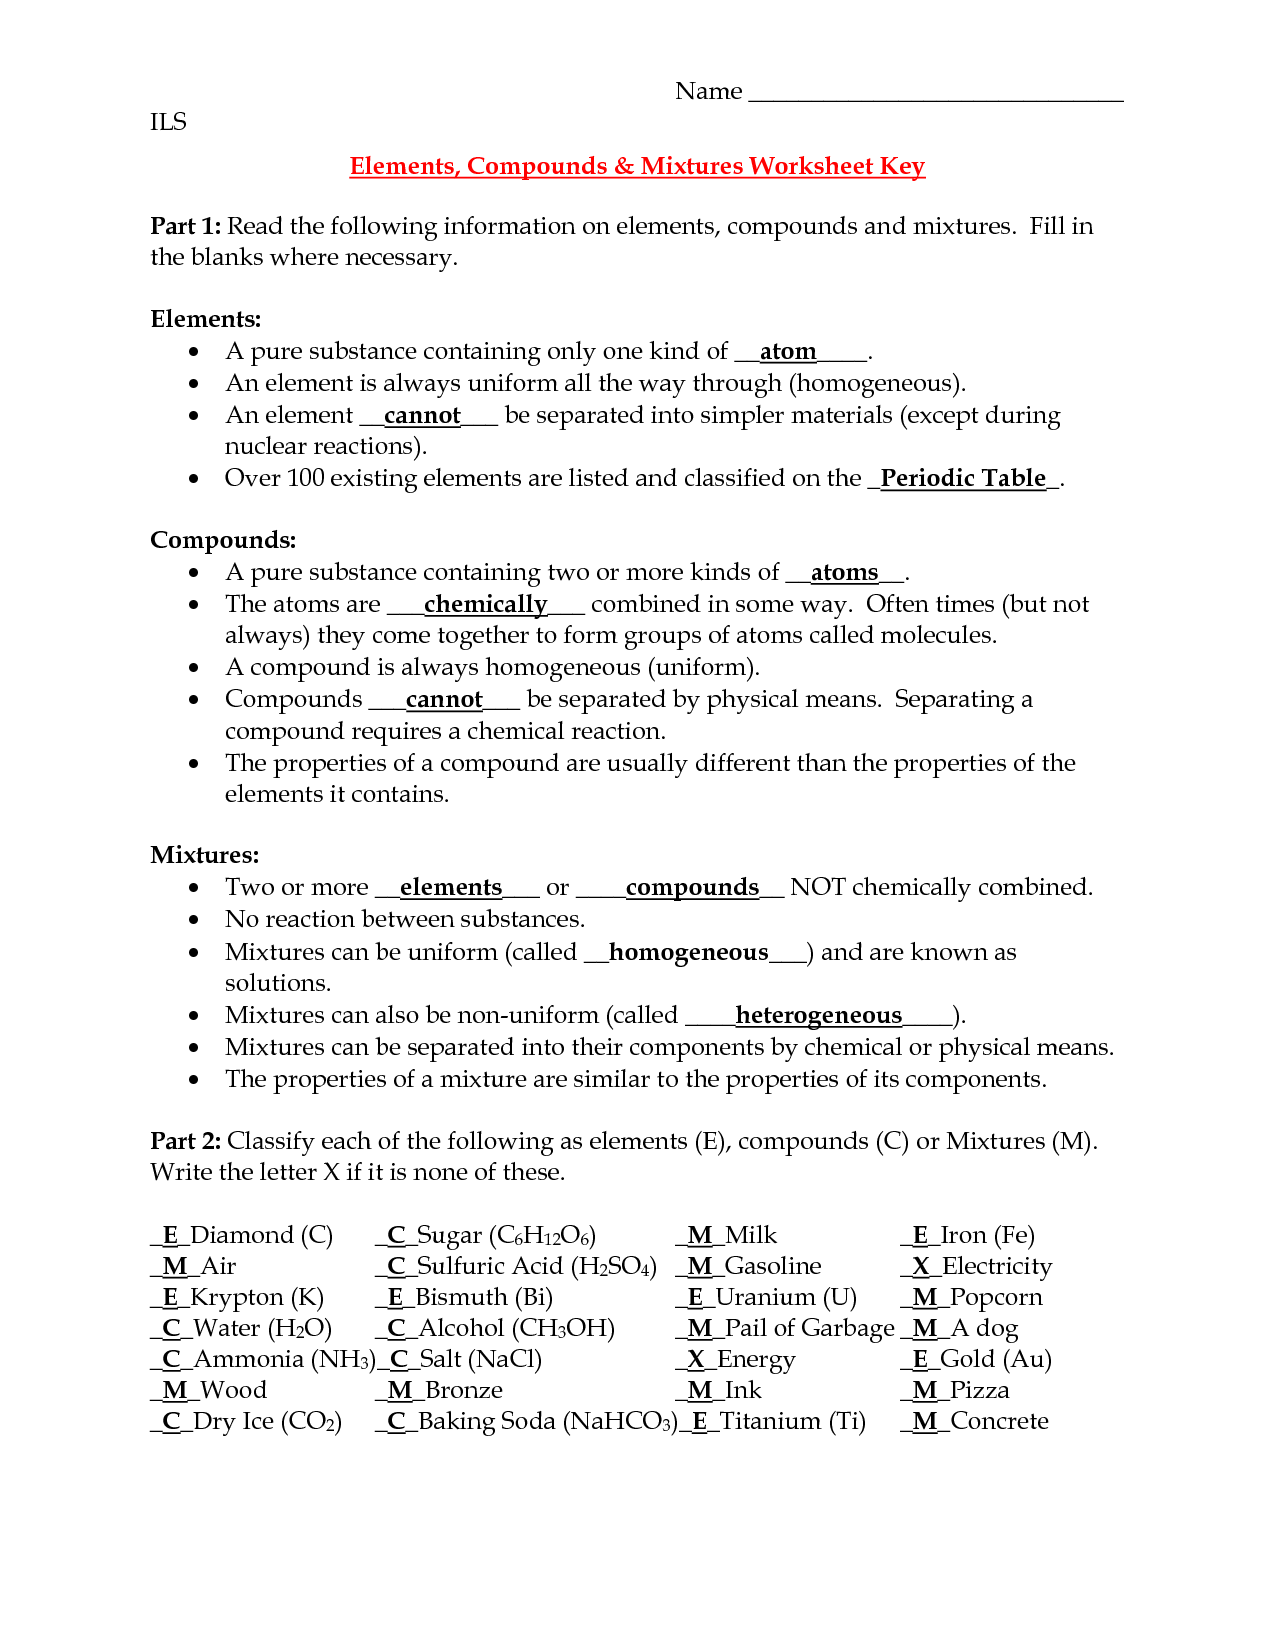 17 Best Images of Elements Compounds And Mixtures Worksheet  Element Compound Mixture Worksheet 